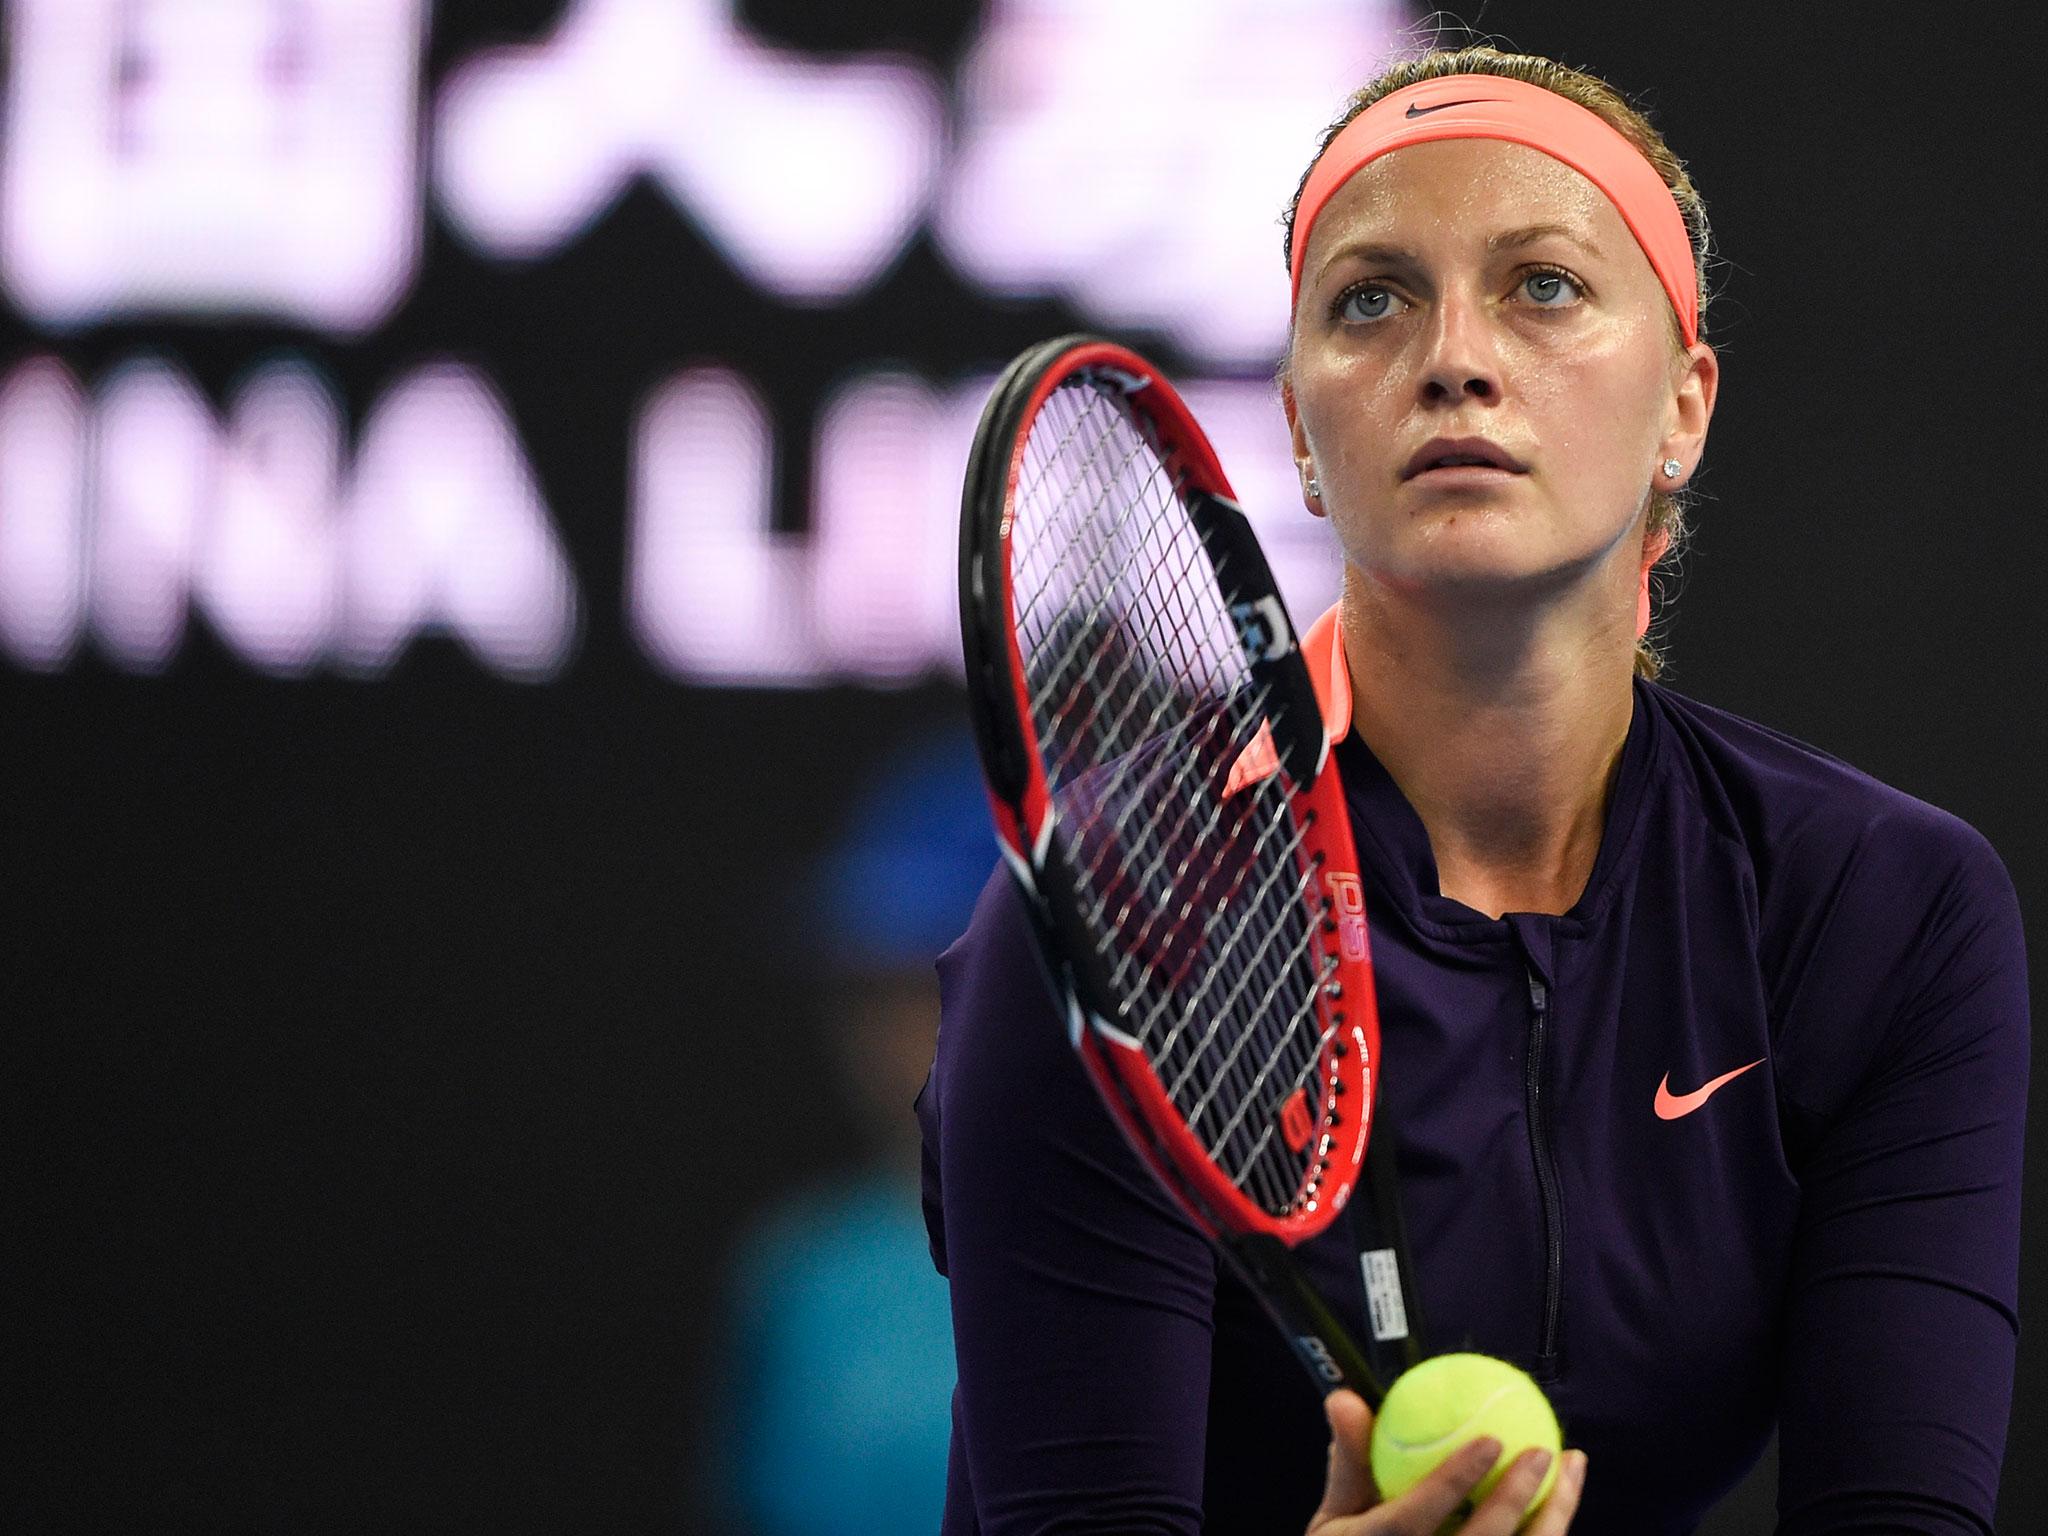 Kvitova underwent surgery lasting nearly four hours shortly after the attack